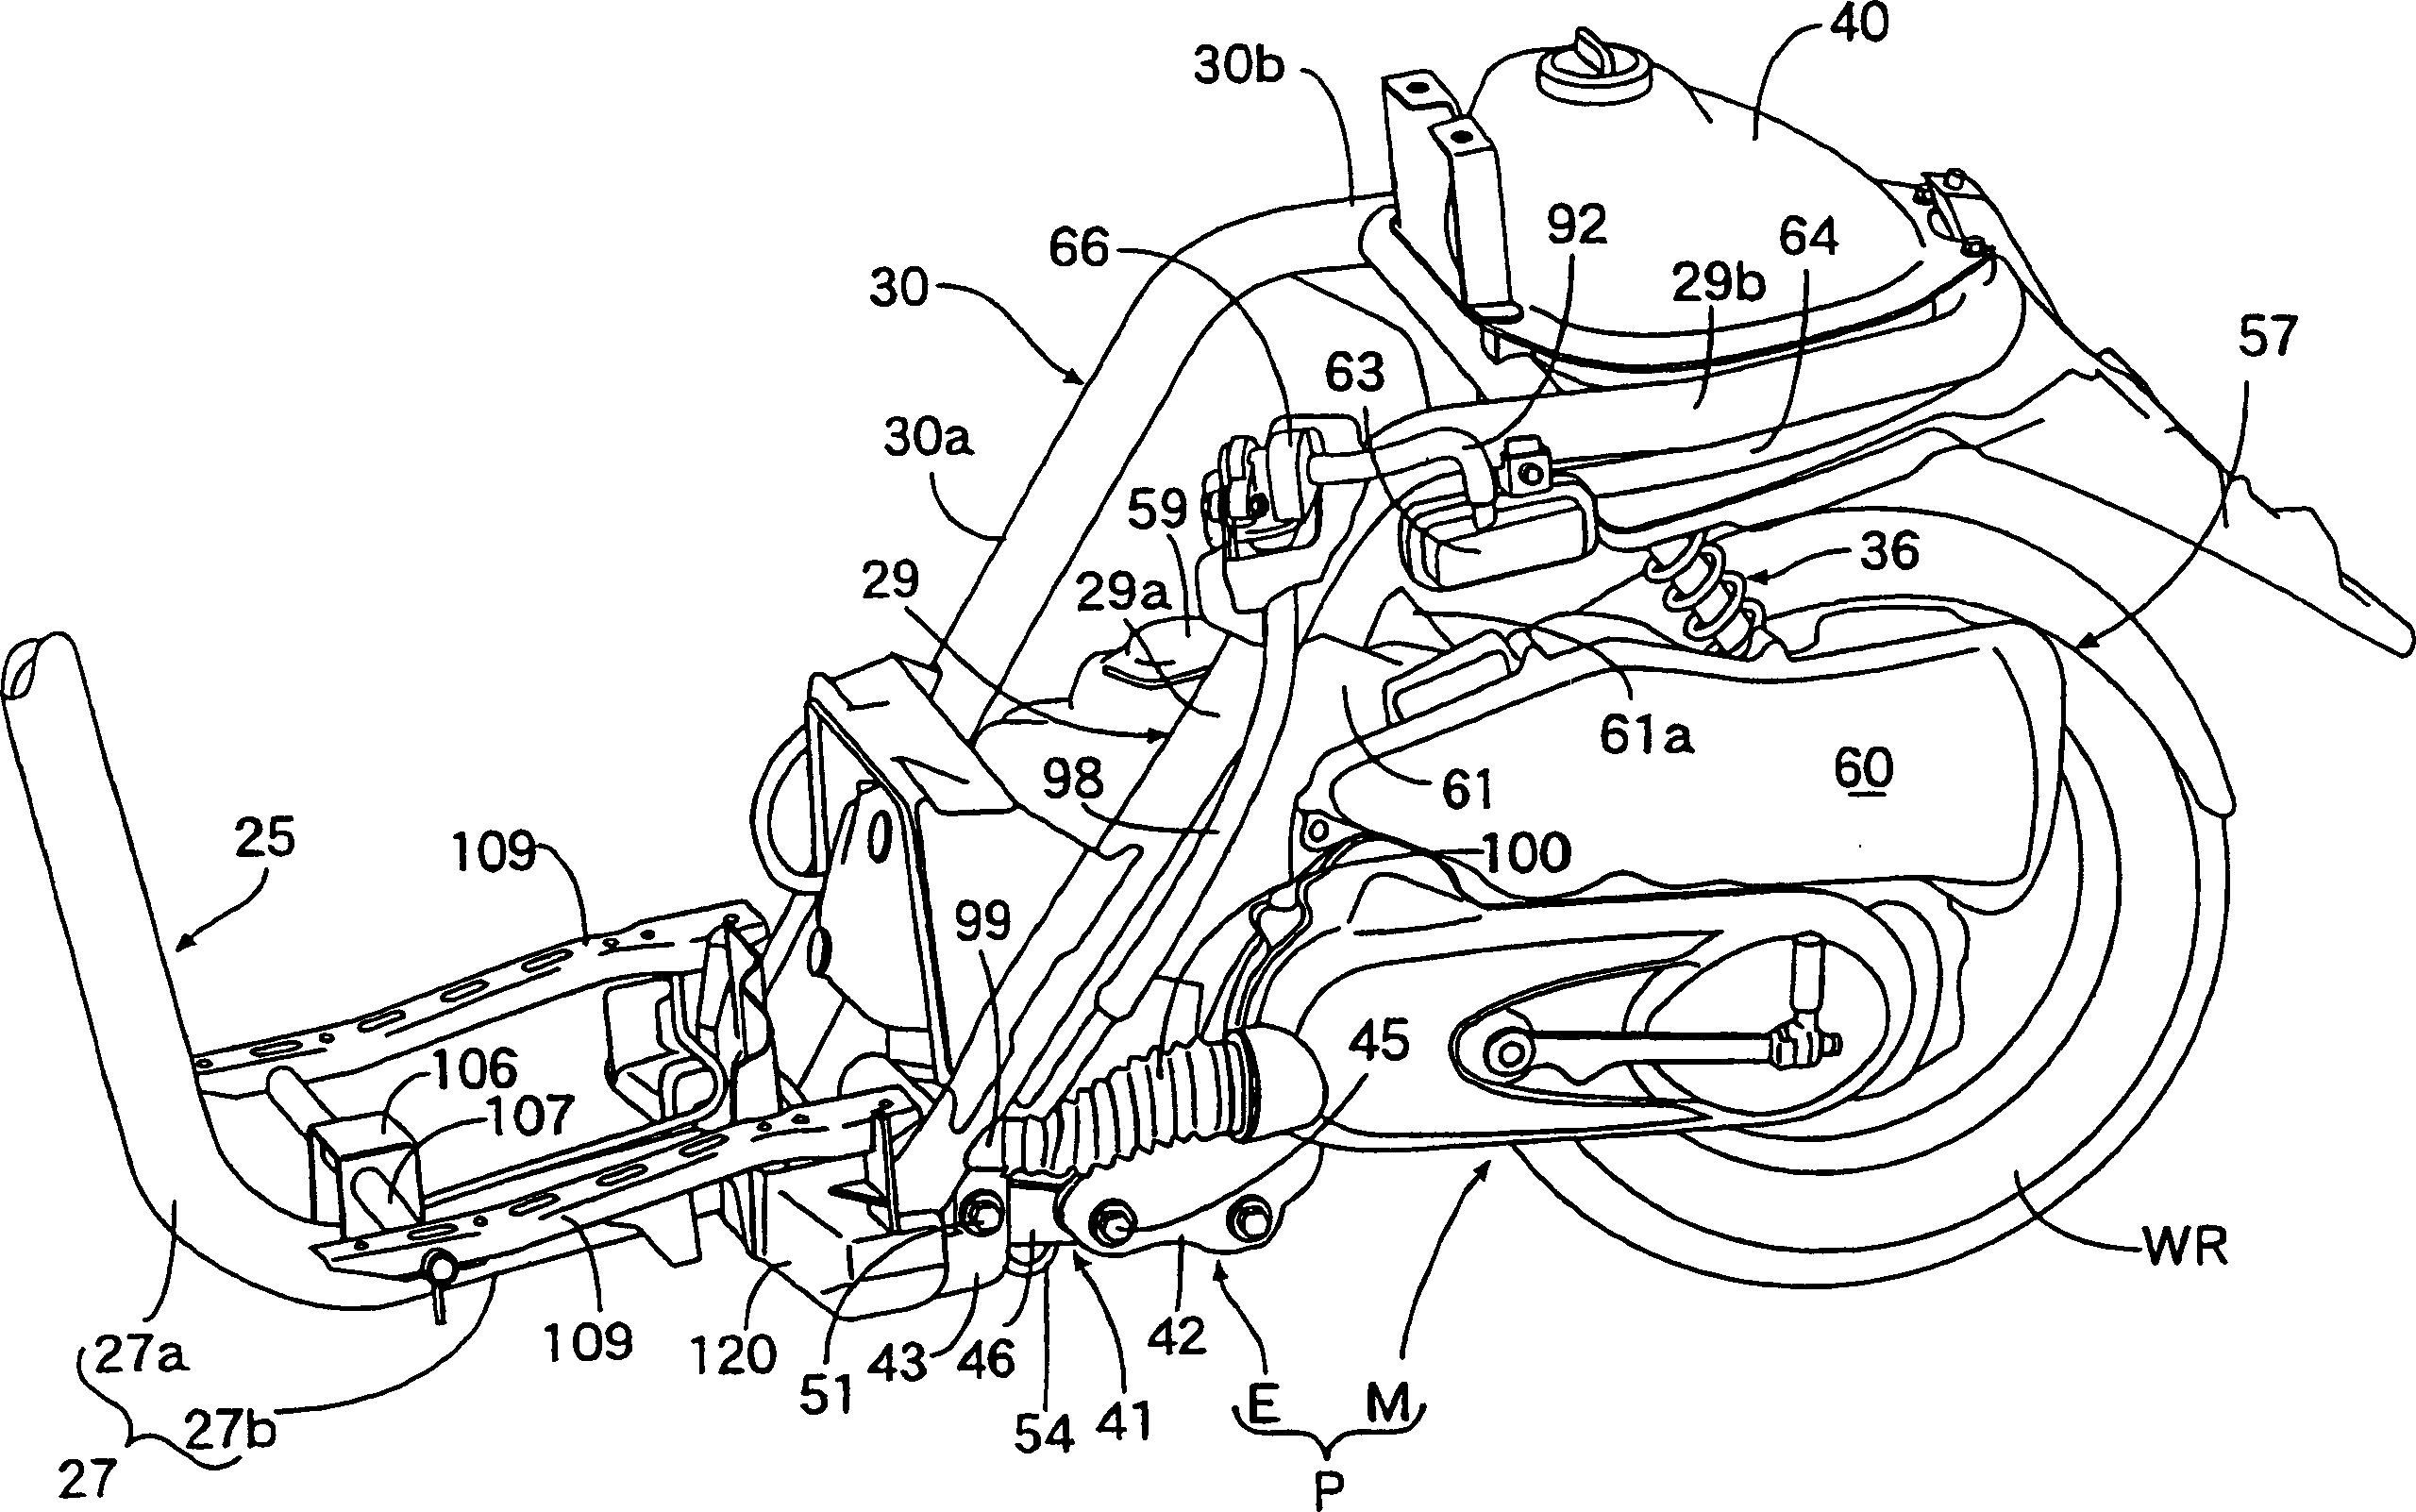 Secondary air supply device for motor-driven two wheeler